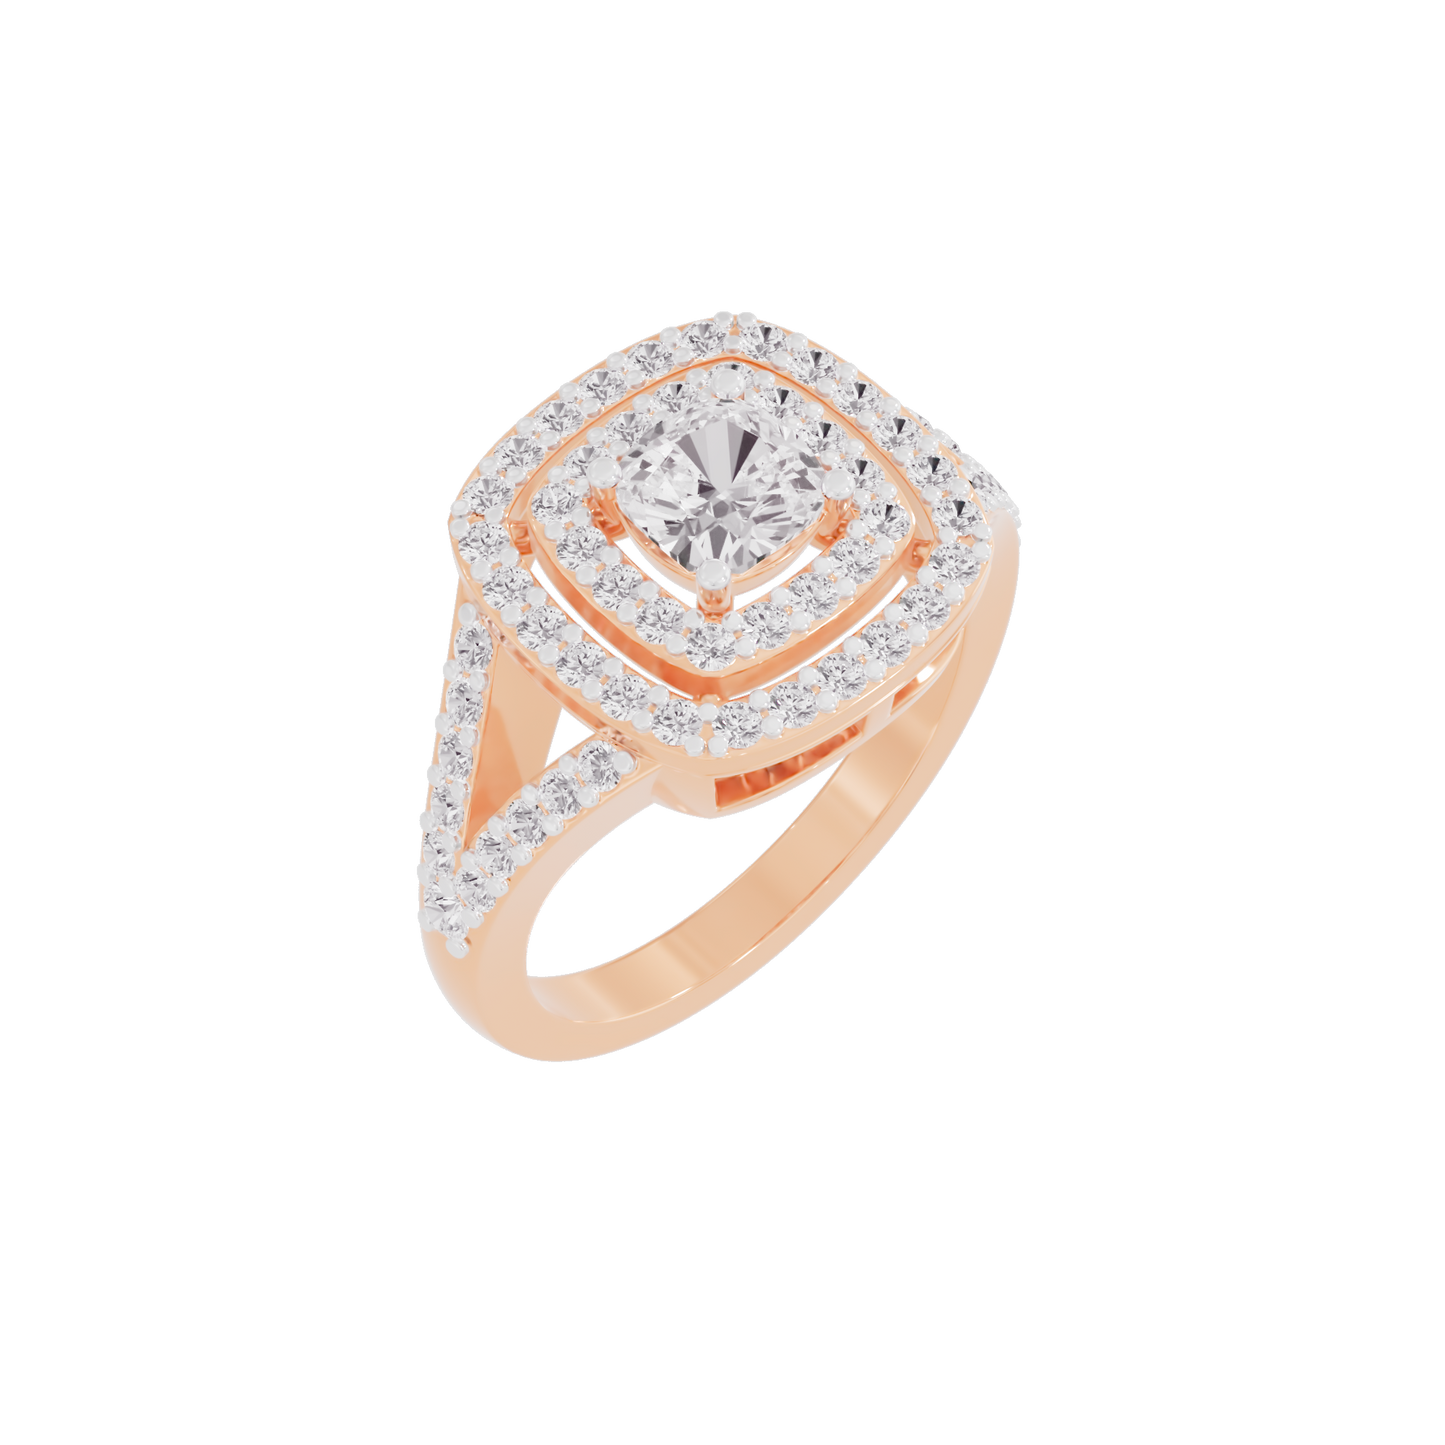 Ethereal Enigma Diamond Ring